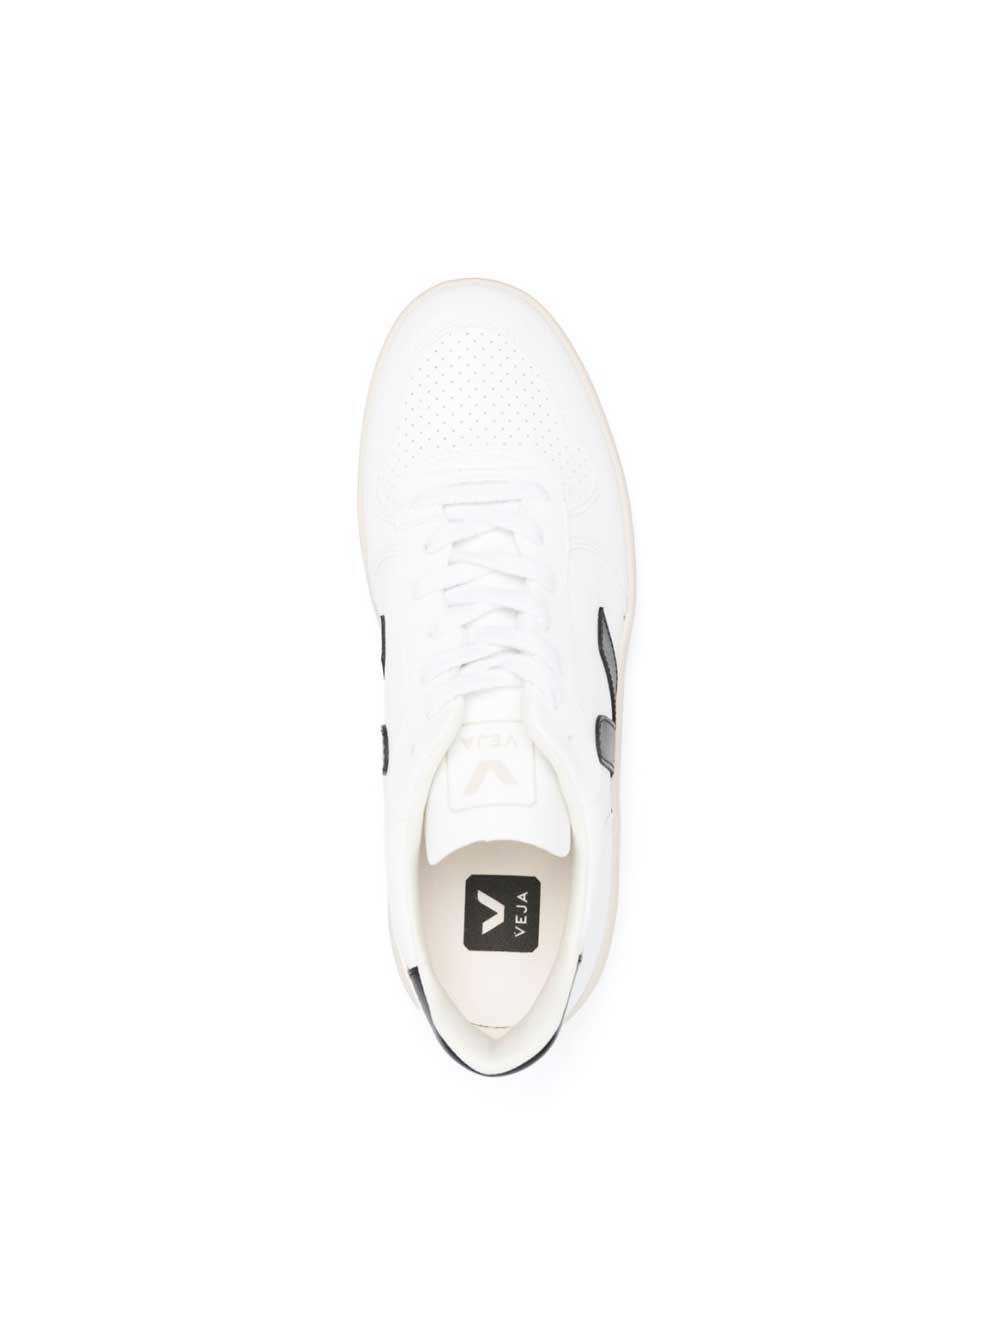 V-10 White And Black Sneakers